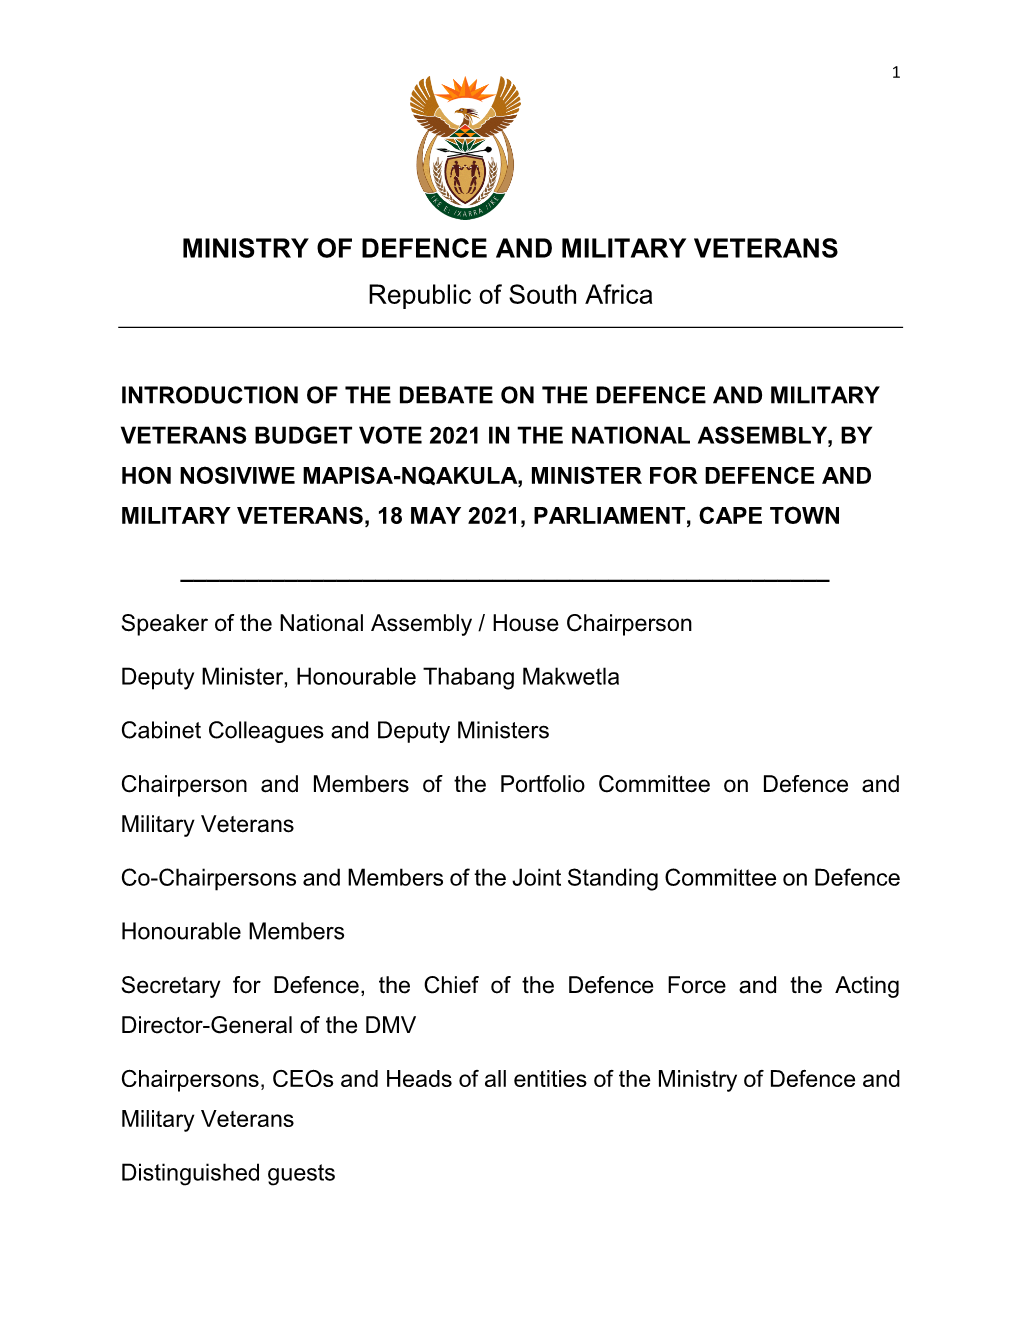 Minister of Defence & Military Veterans Budget Speech